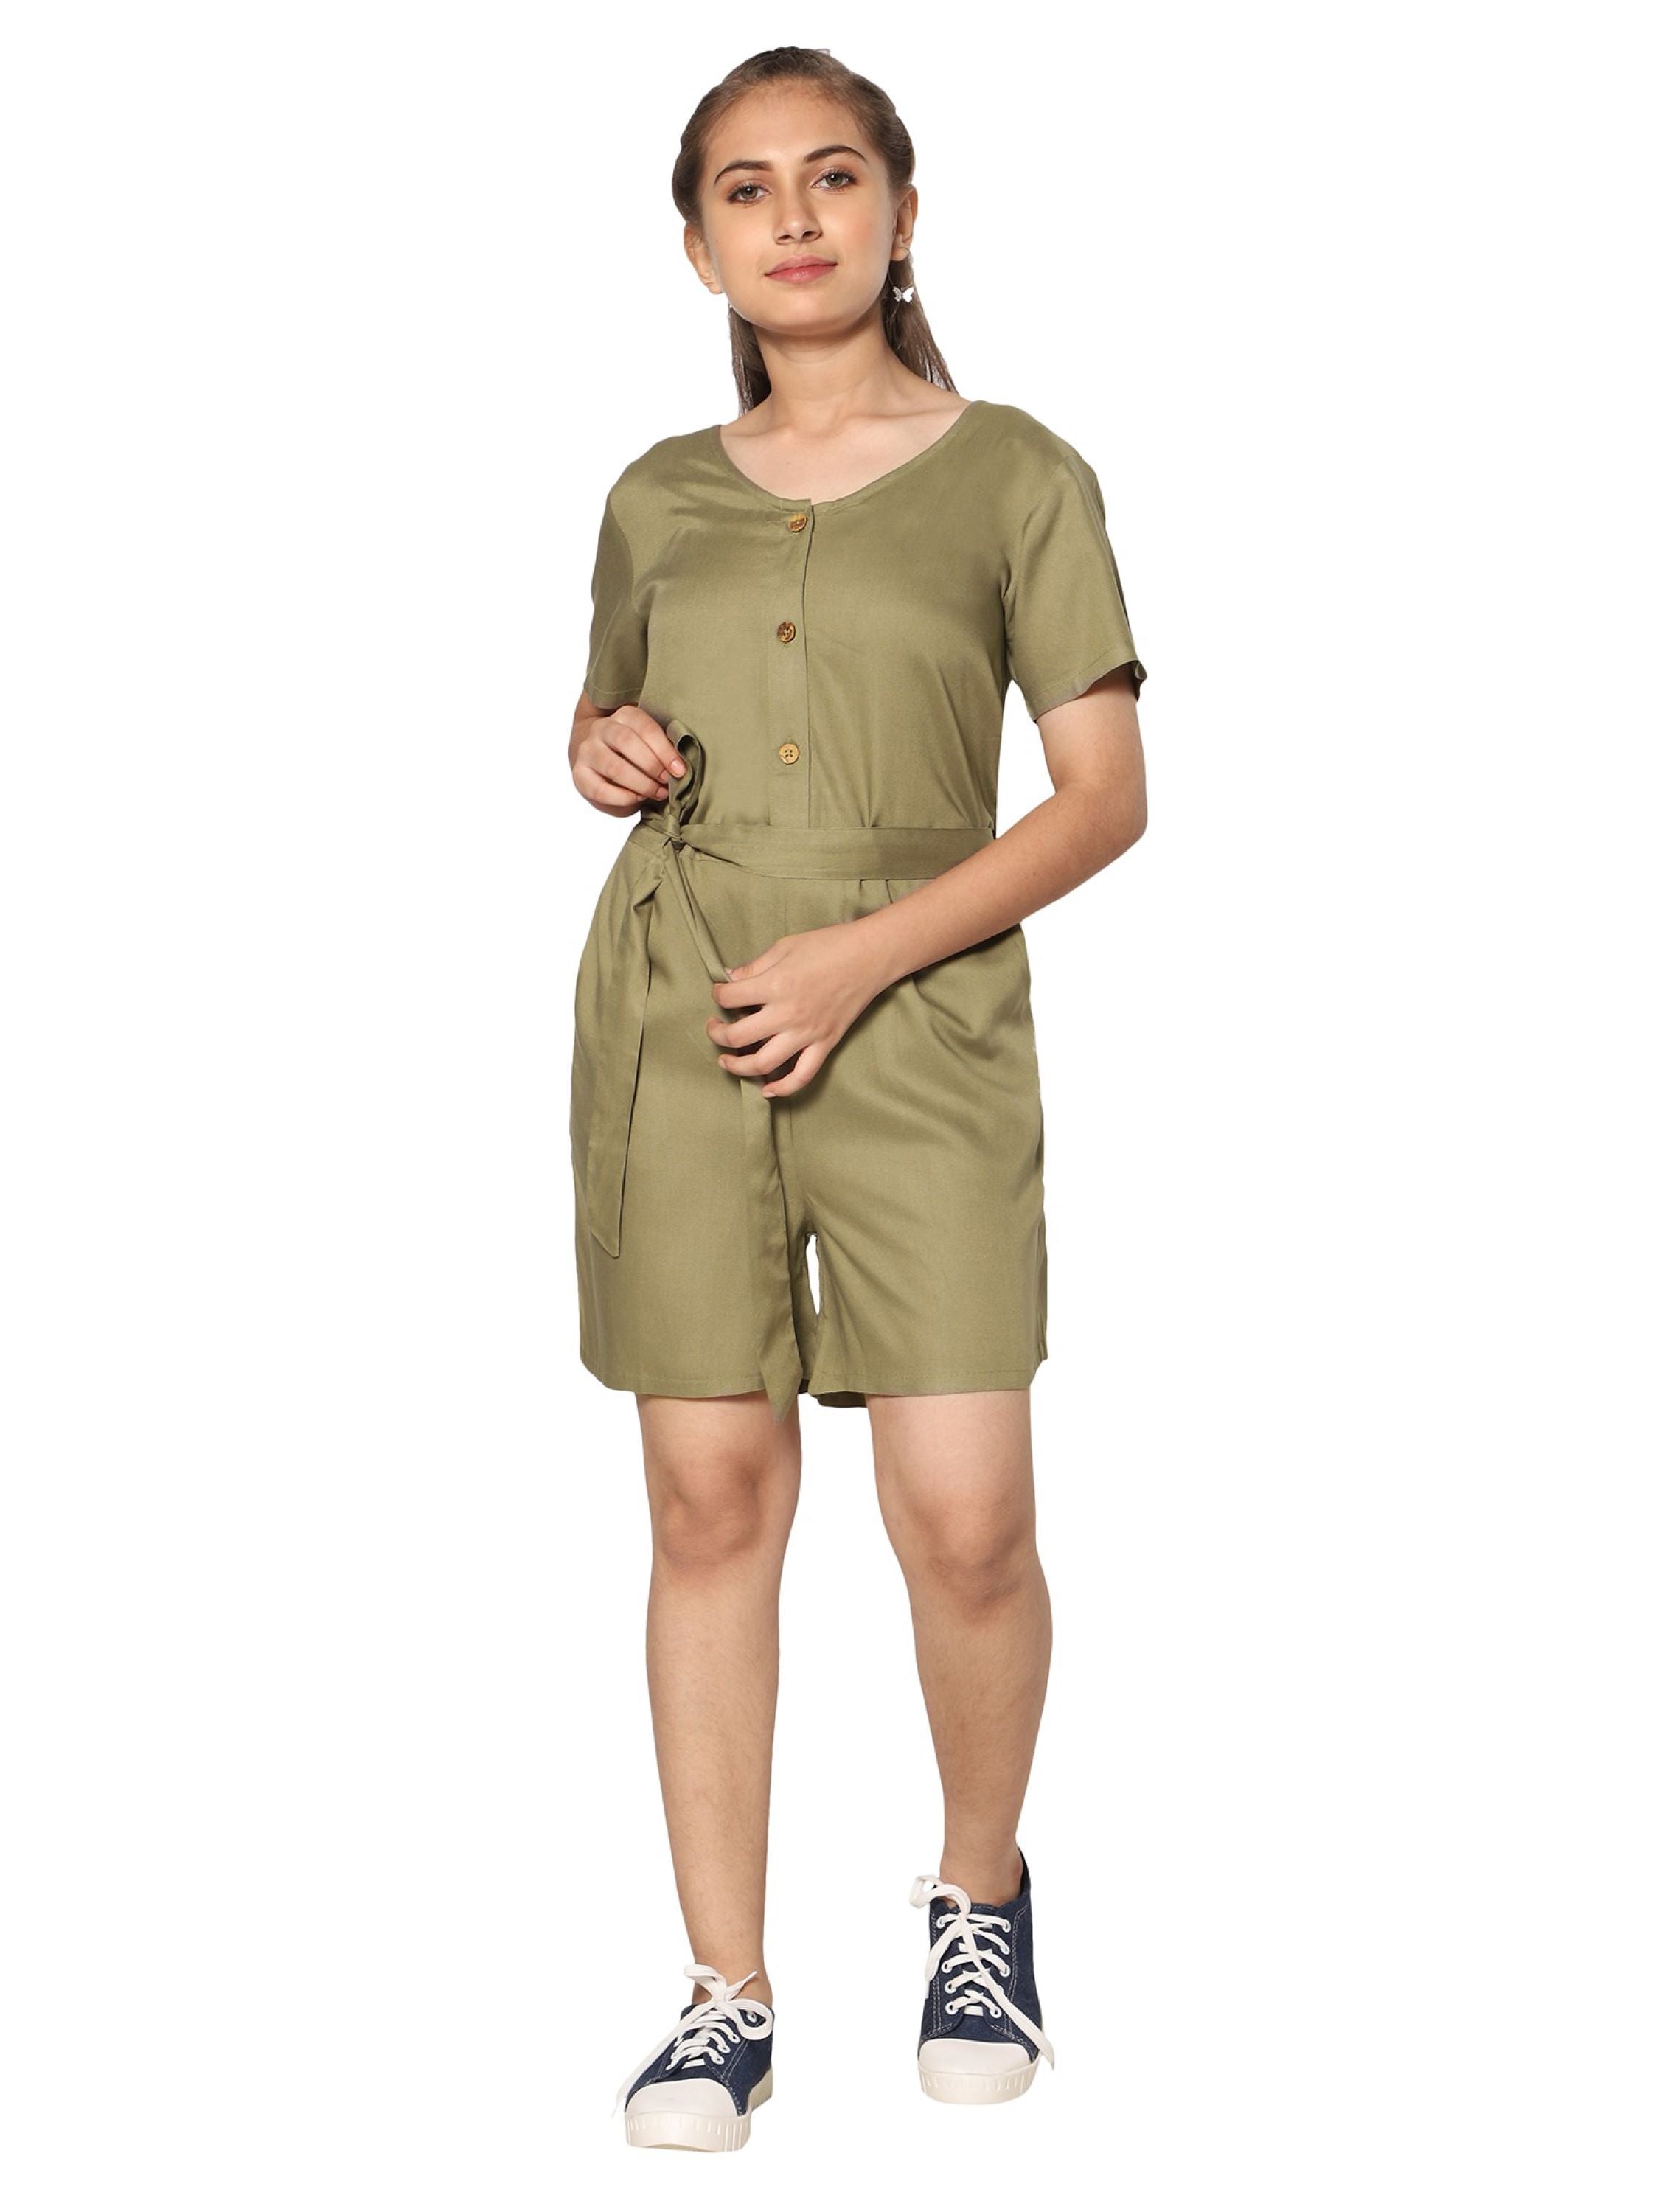 TeenTrums Girls Rayon Play Suit-Olive